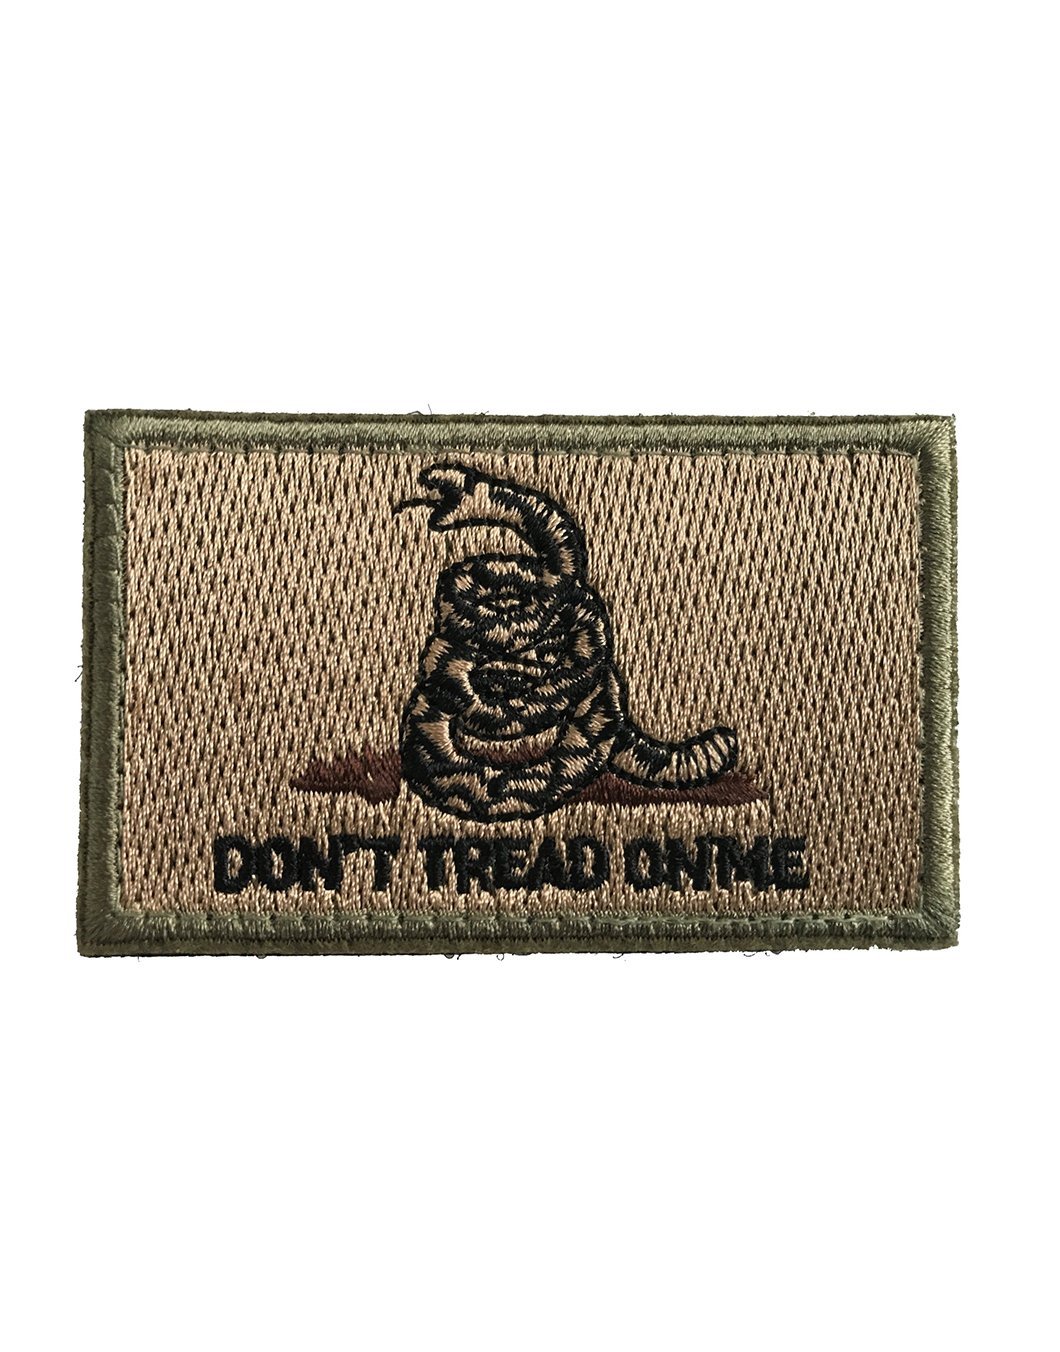 Don't tread on me Patch - Olive - Gym Generation®--www.gymgeneration.ch